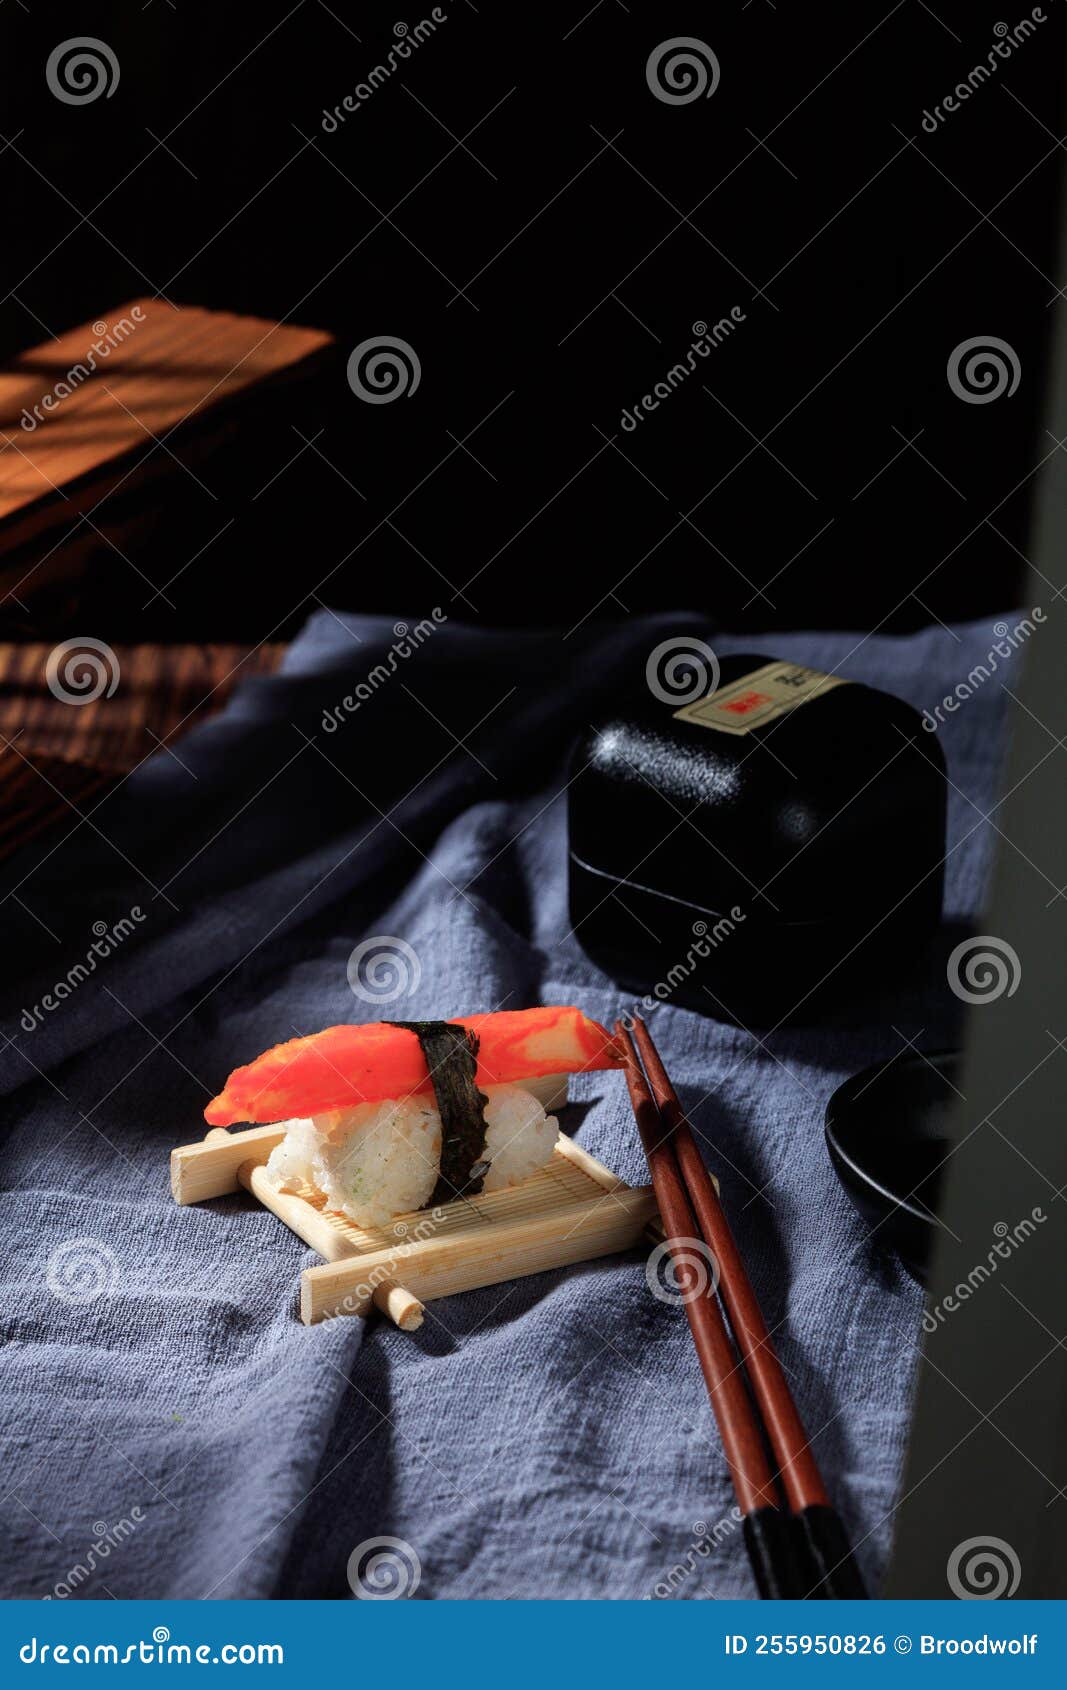 Pictures of Japanese Traditional Food Sushi Stock Photo - Image of ...